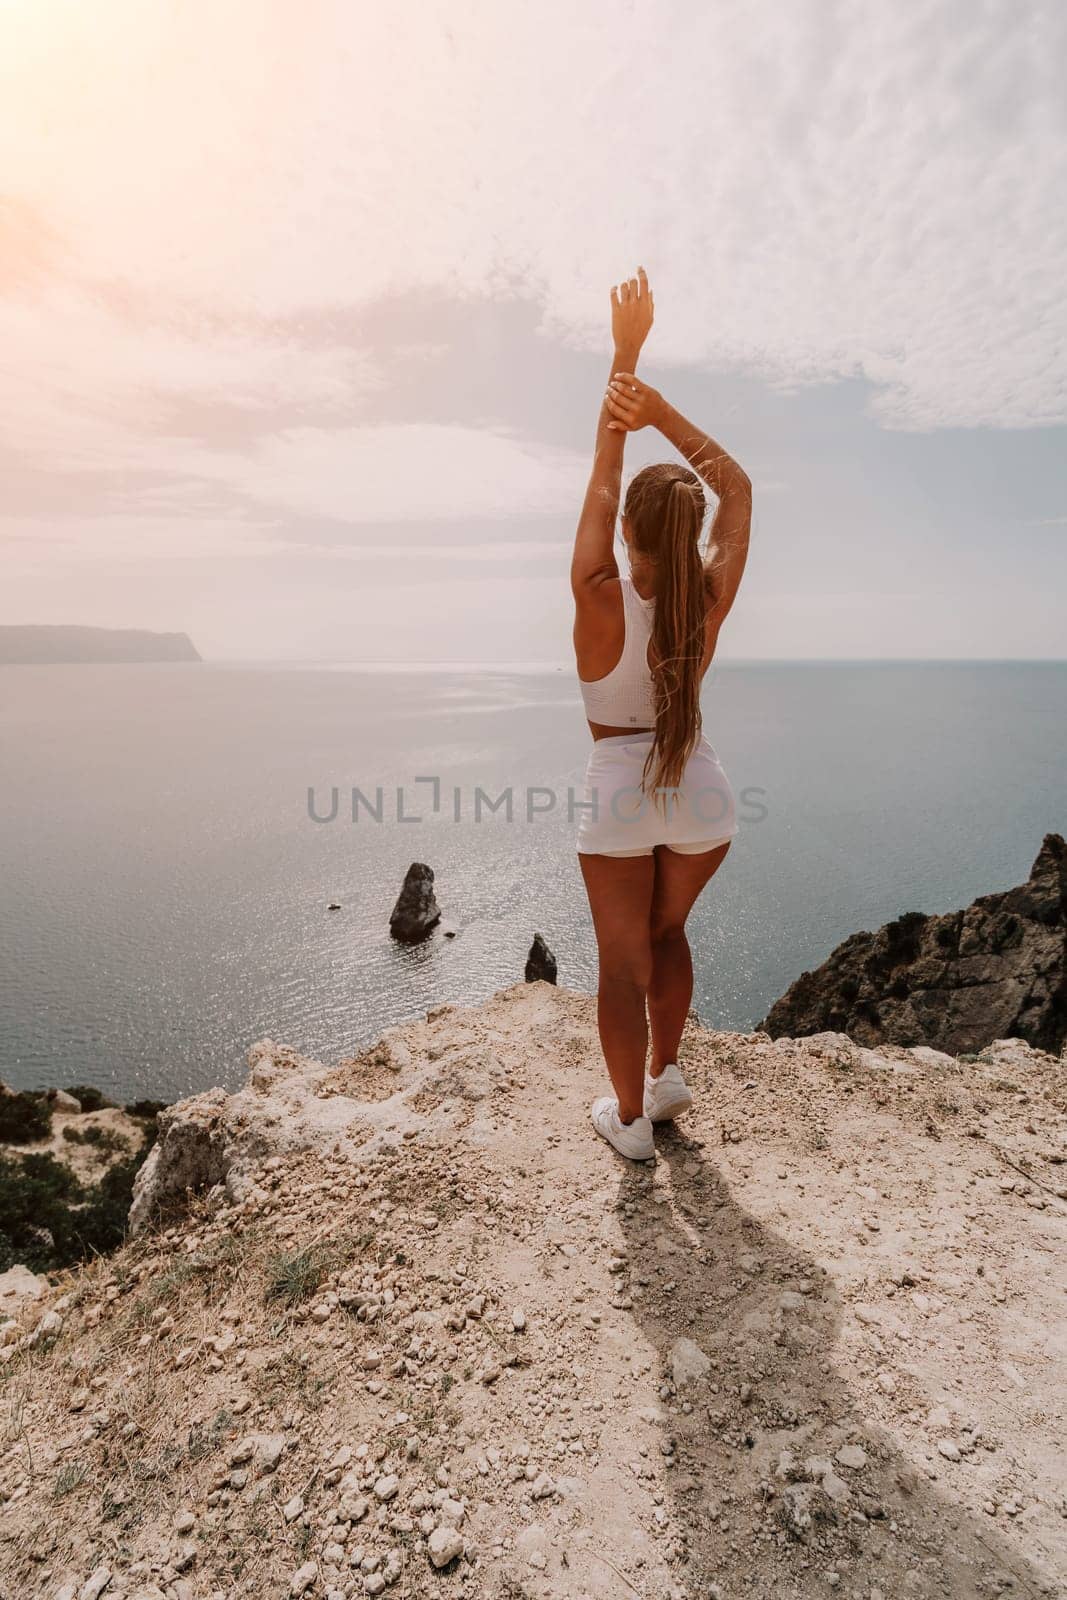 Woman travel sea. Happy tourist in hat enjoy taking picture outdoors for memories. Woman traveler posing on the beach at sea surrounded by volcanic mountains, sharing travel adventure journey